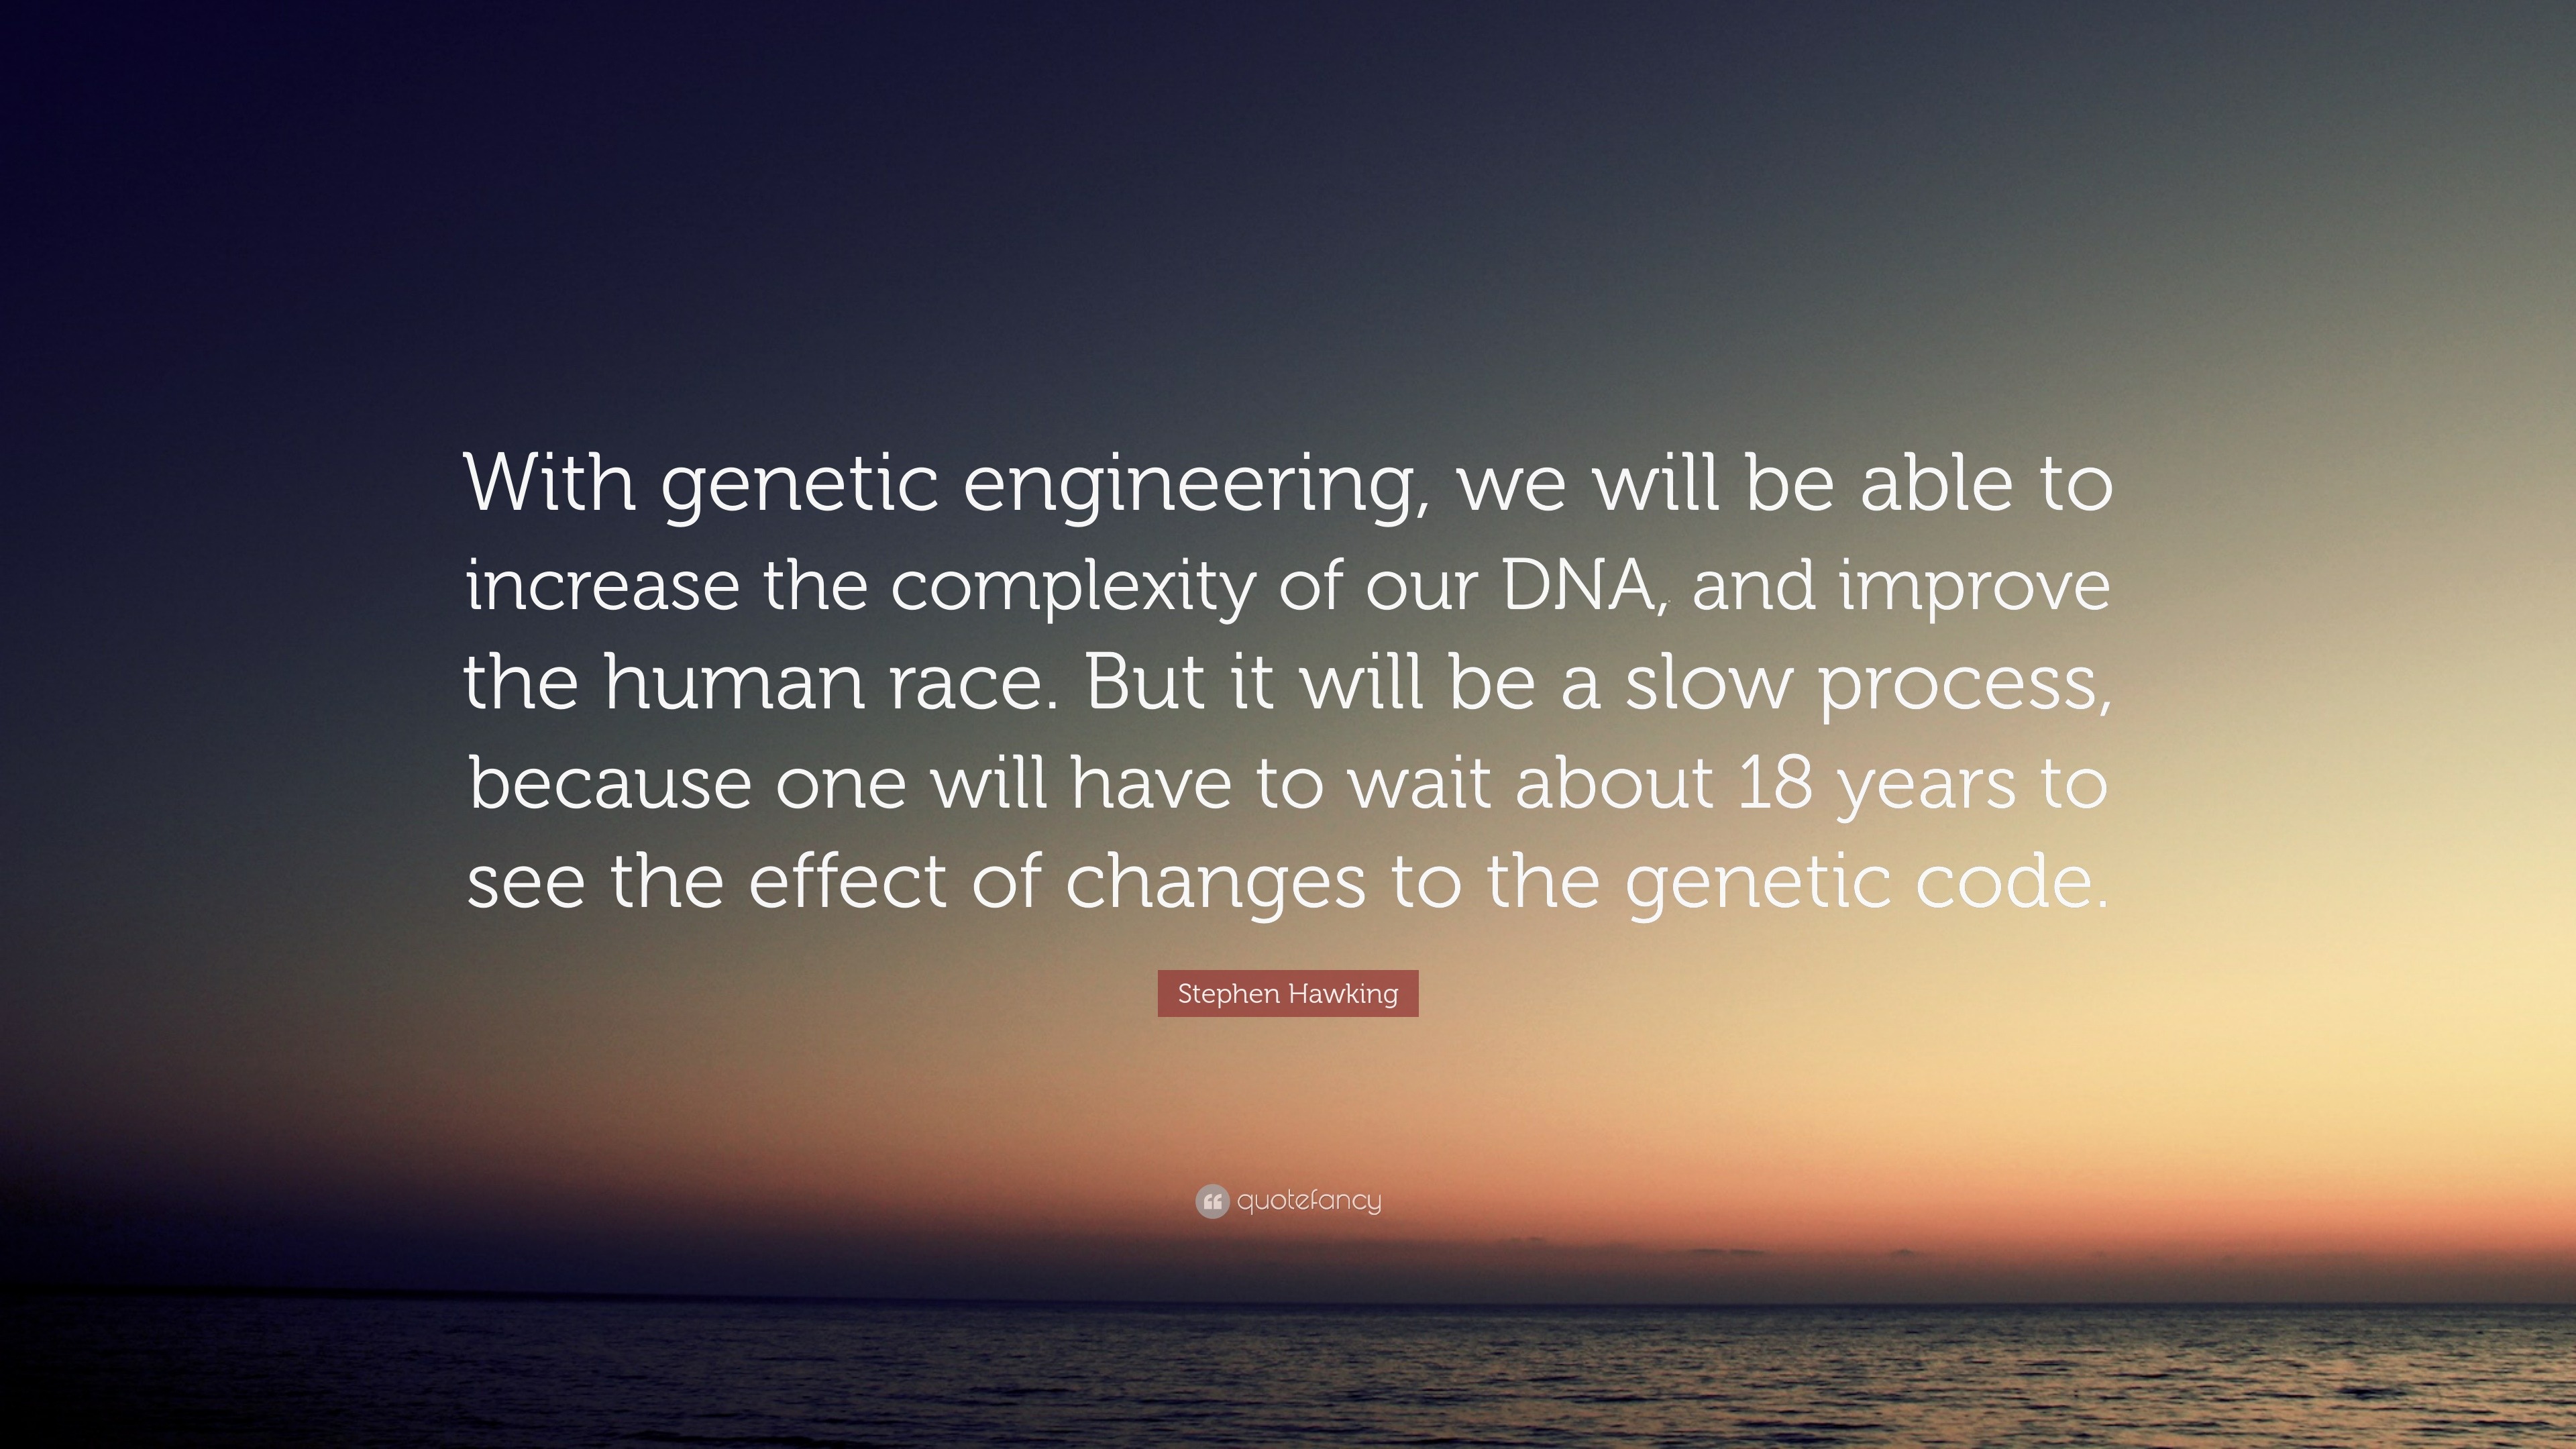 brave new world quotes about genetic engineering